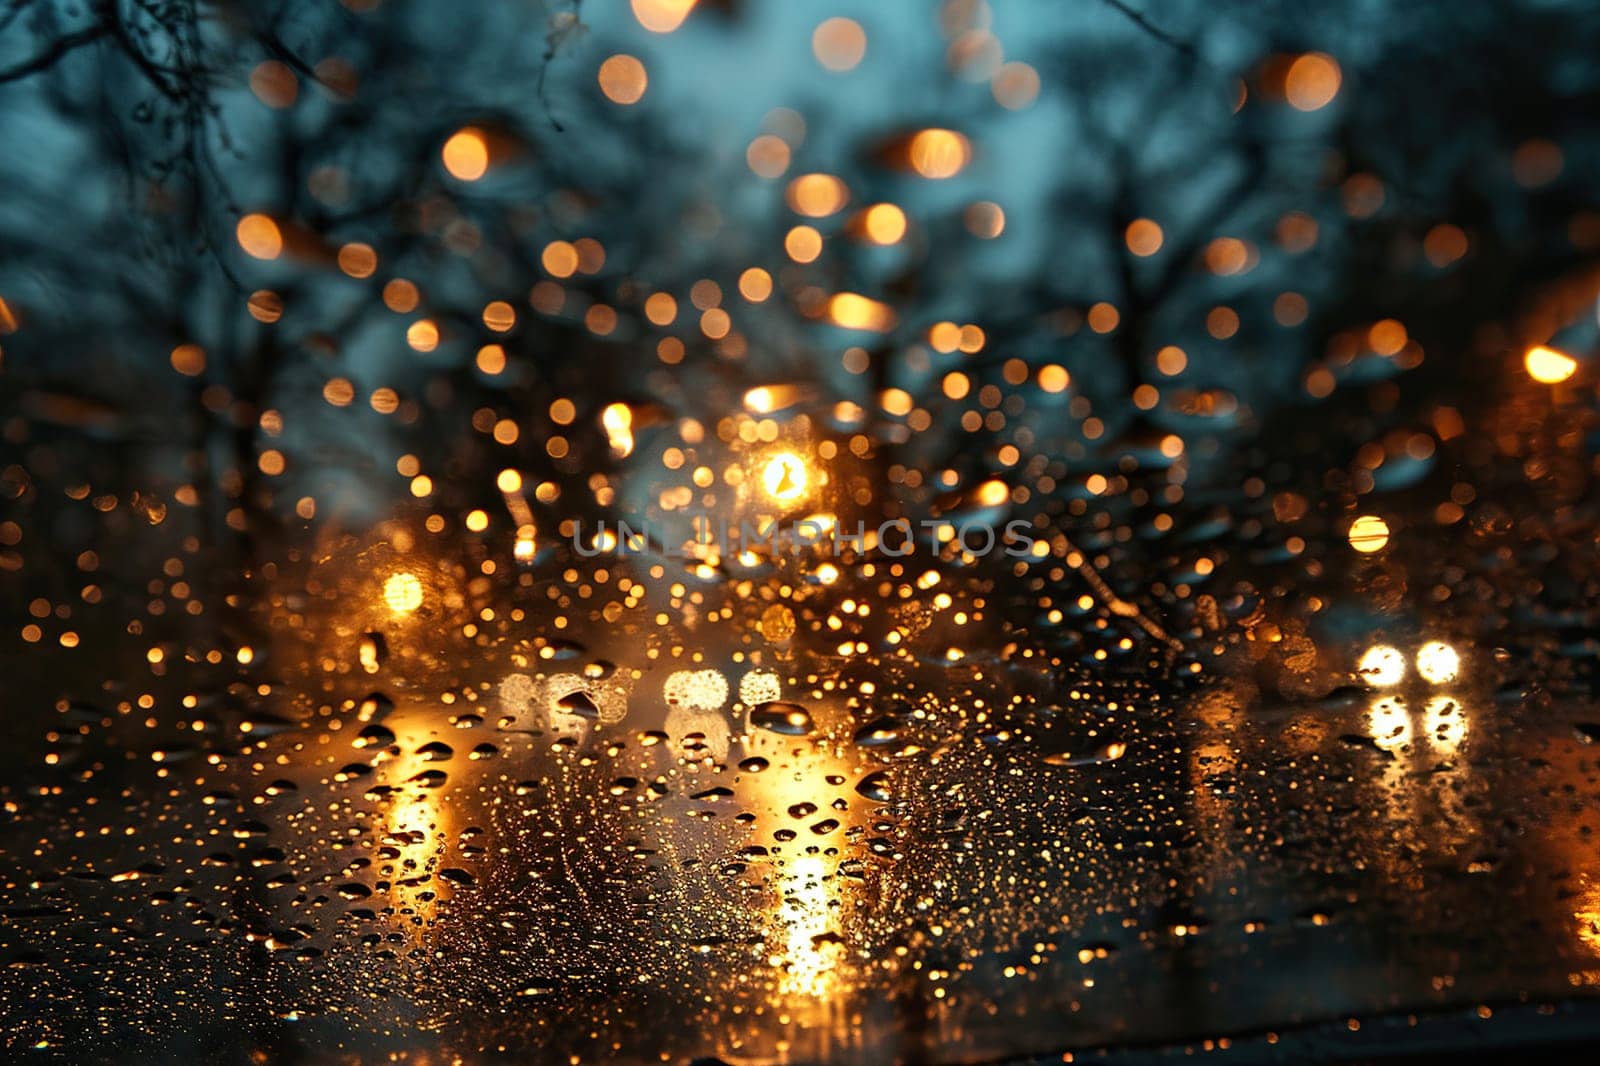 Raindrops close-up on a car window in the evening.